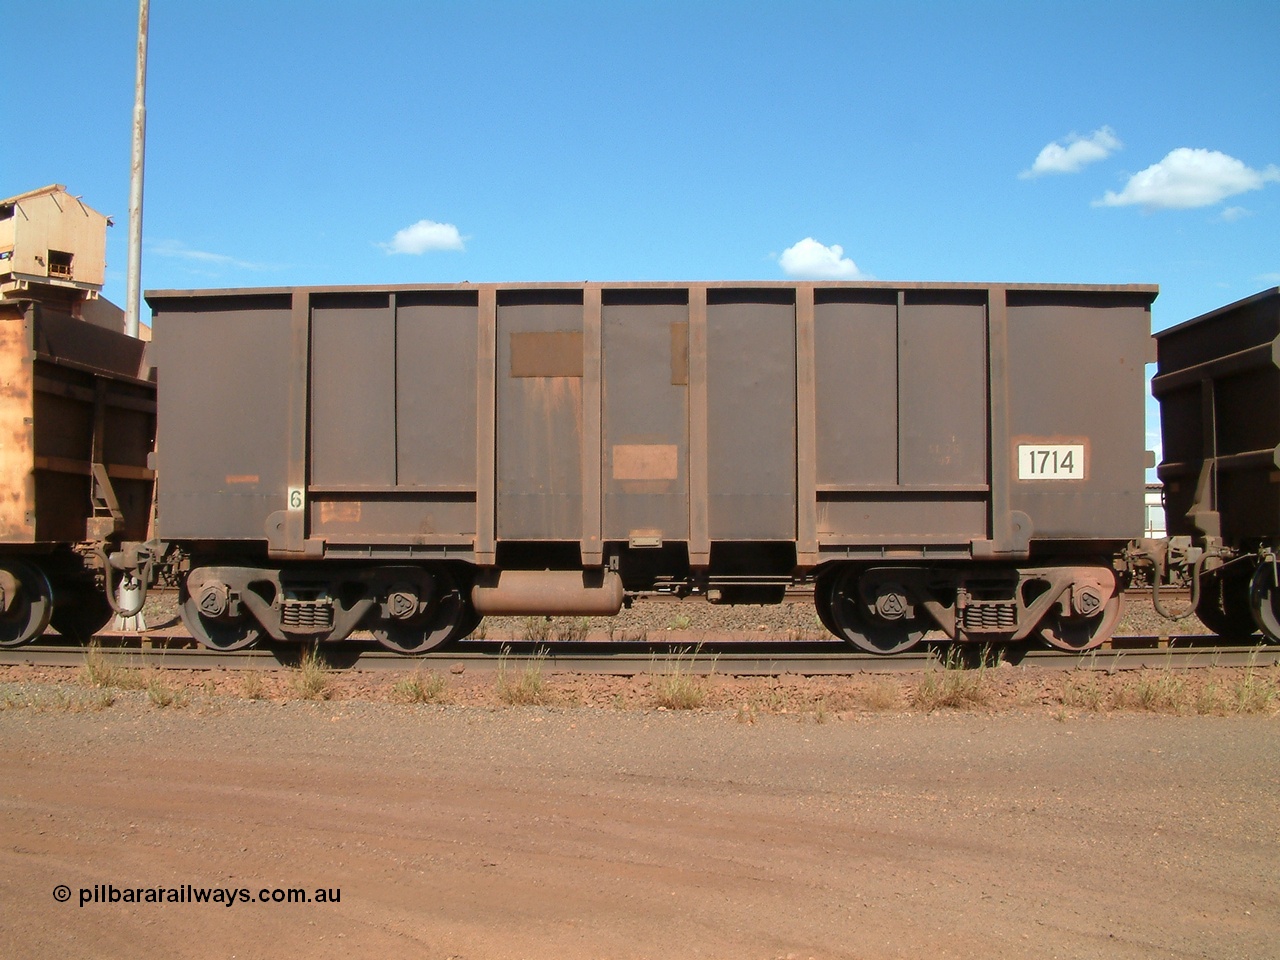 040412 143253
Nelson Point, Comeng WA built ore waggon 1714 one of 288 waggons built in 1974. 12th April 2004.
Keywords: 1714;Comeng-WA;BHP-ore-waggon;